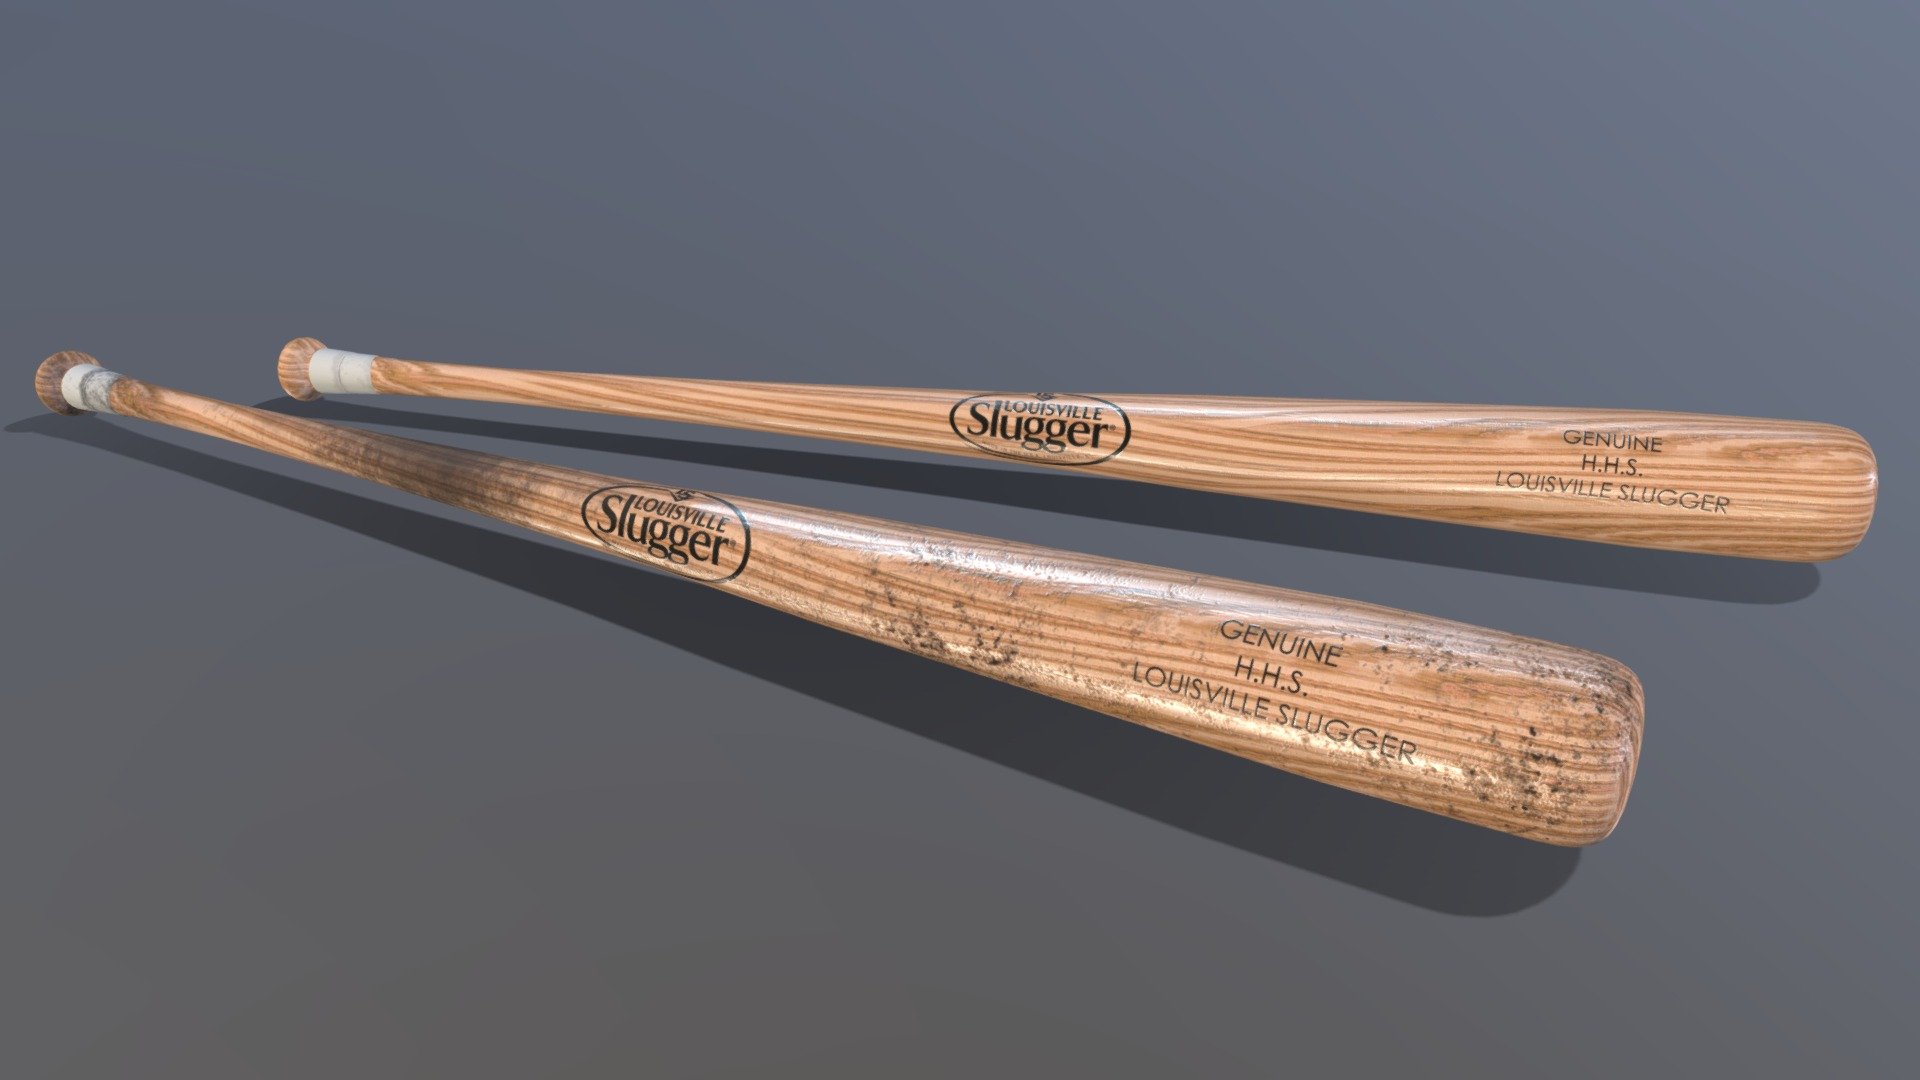 Louisville Slugger Baseball Bat
Game-Ready! MLB-style wood baseball bat. Perfect for use in games, Virtual Reality (VR), or any other real-time applications. Highly detailed for close-up view.

Includes model in FBX, OBJ, and LXO file formats. 4K textures in .png format.

Bonus!
Includes both &ldquo;Clean